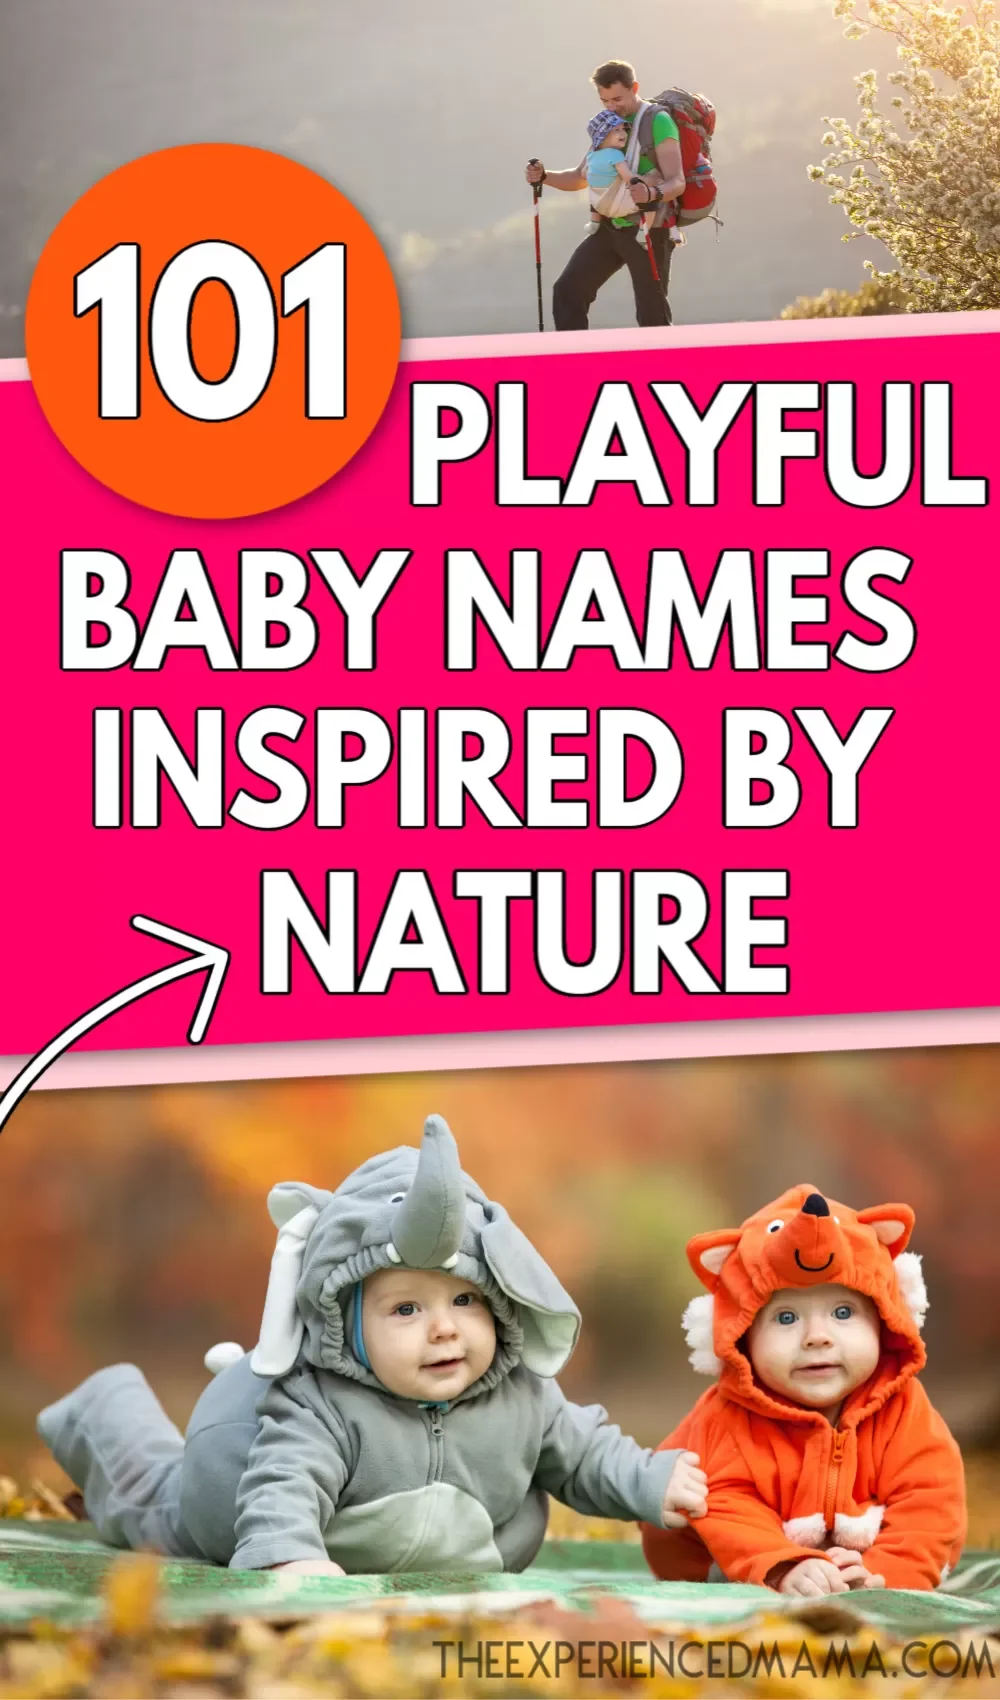 babies with whimsical nature baby names in costumes with text overlay, "101 playful baby names inspired by nature"